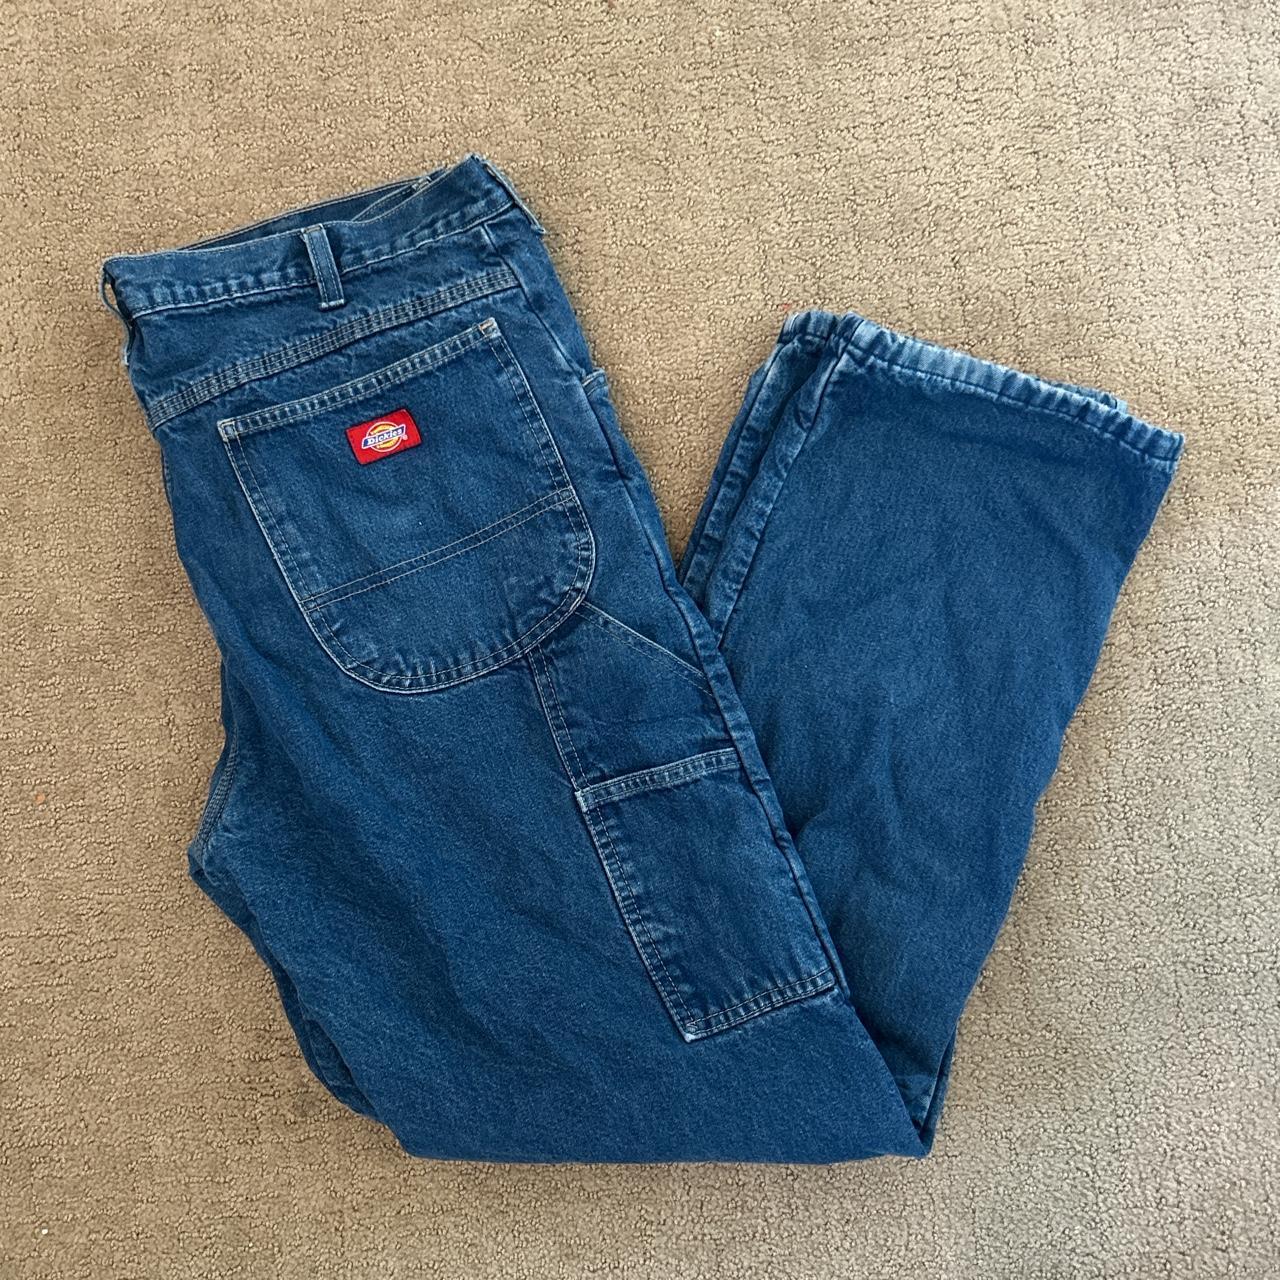 Dickies carpenter jeans | Size 36x32 | Great condition - Depop